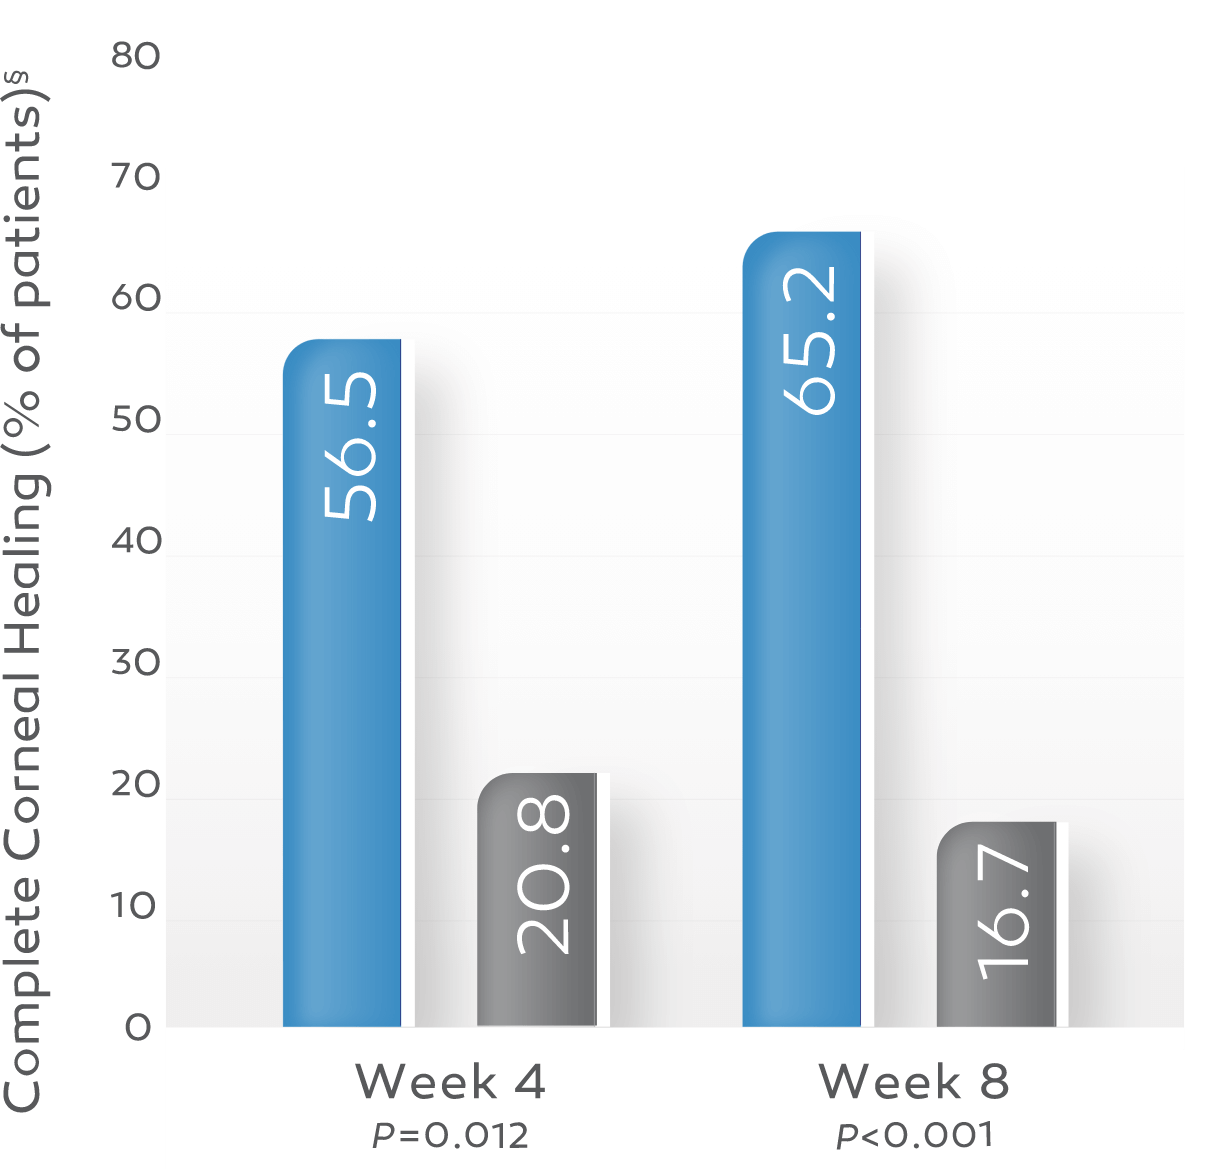 A bar graph representing the results of OXERVATE® treatment at 8 weeks compared to vehicle in 2 clinical trials